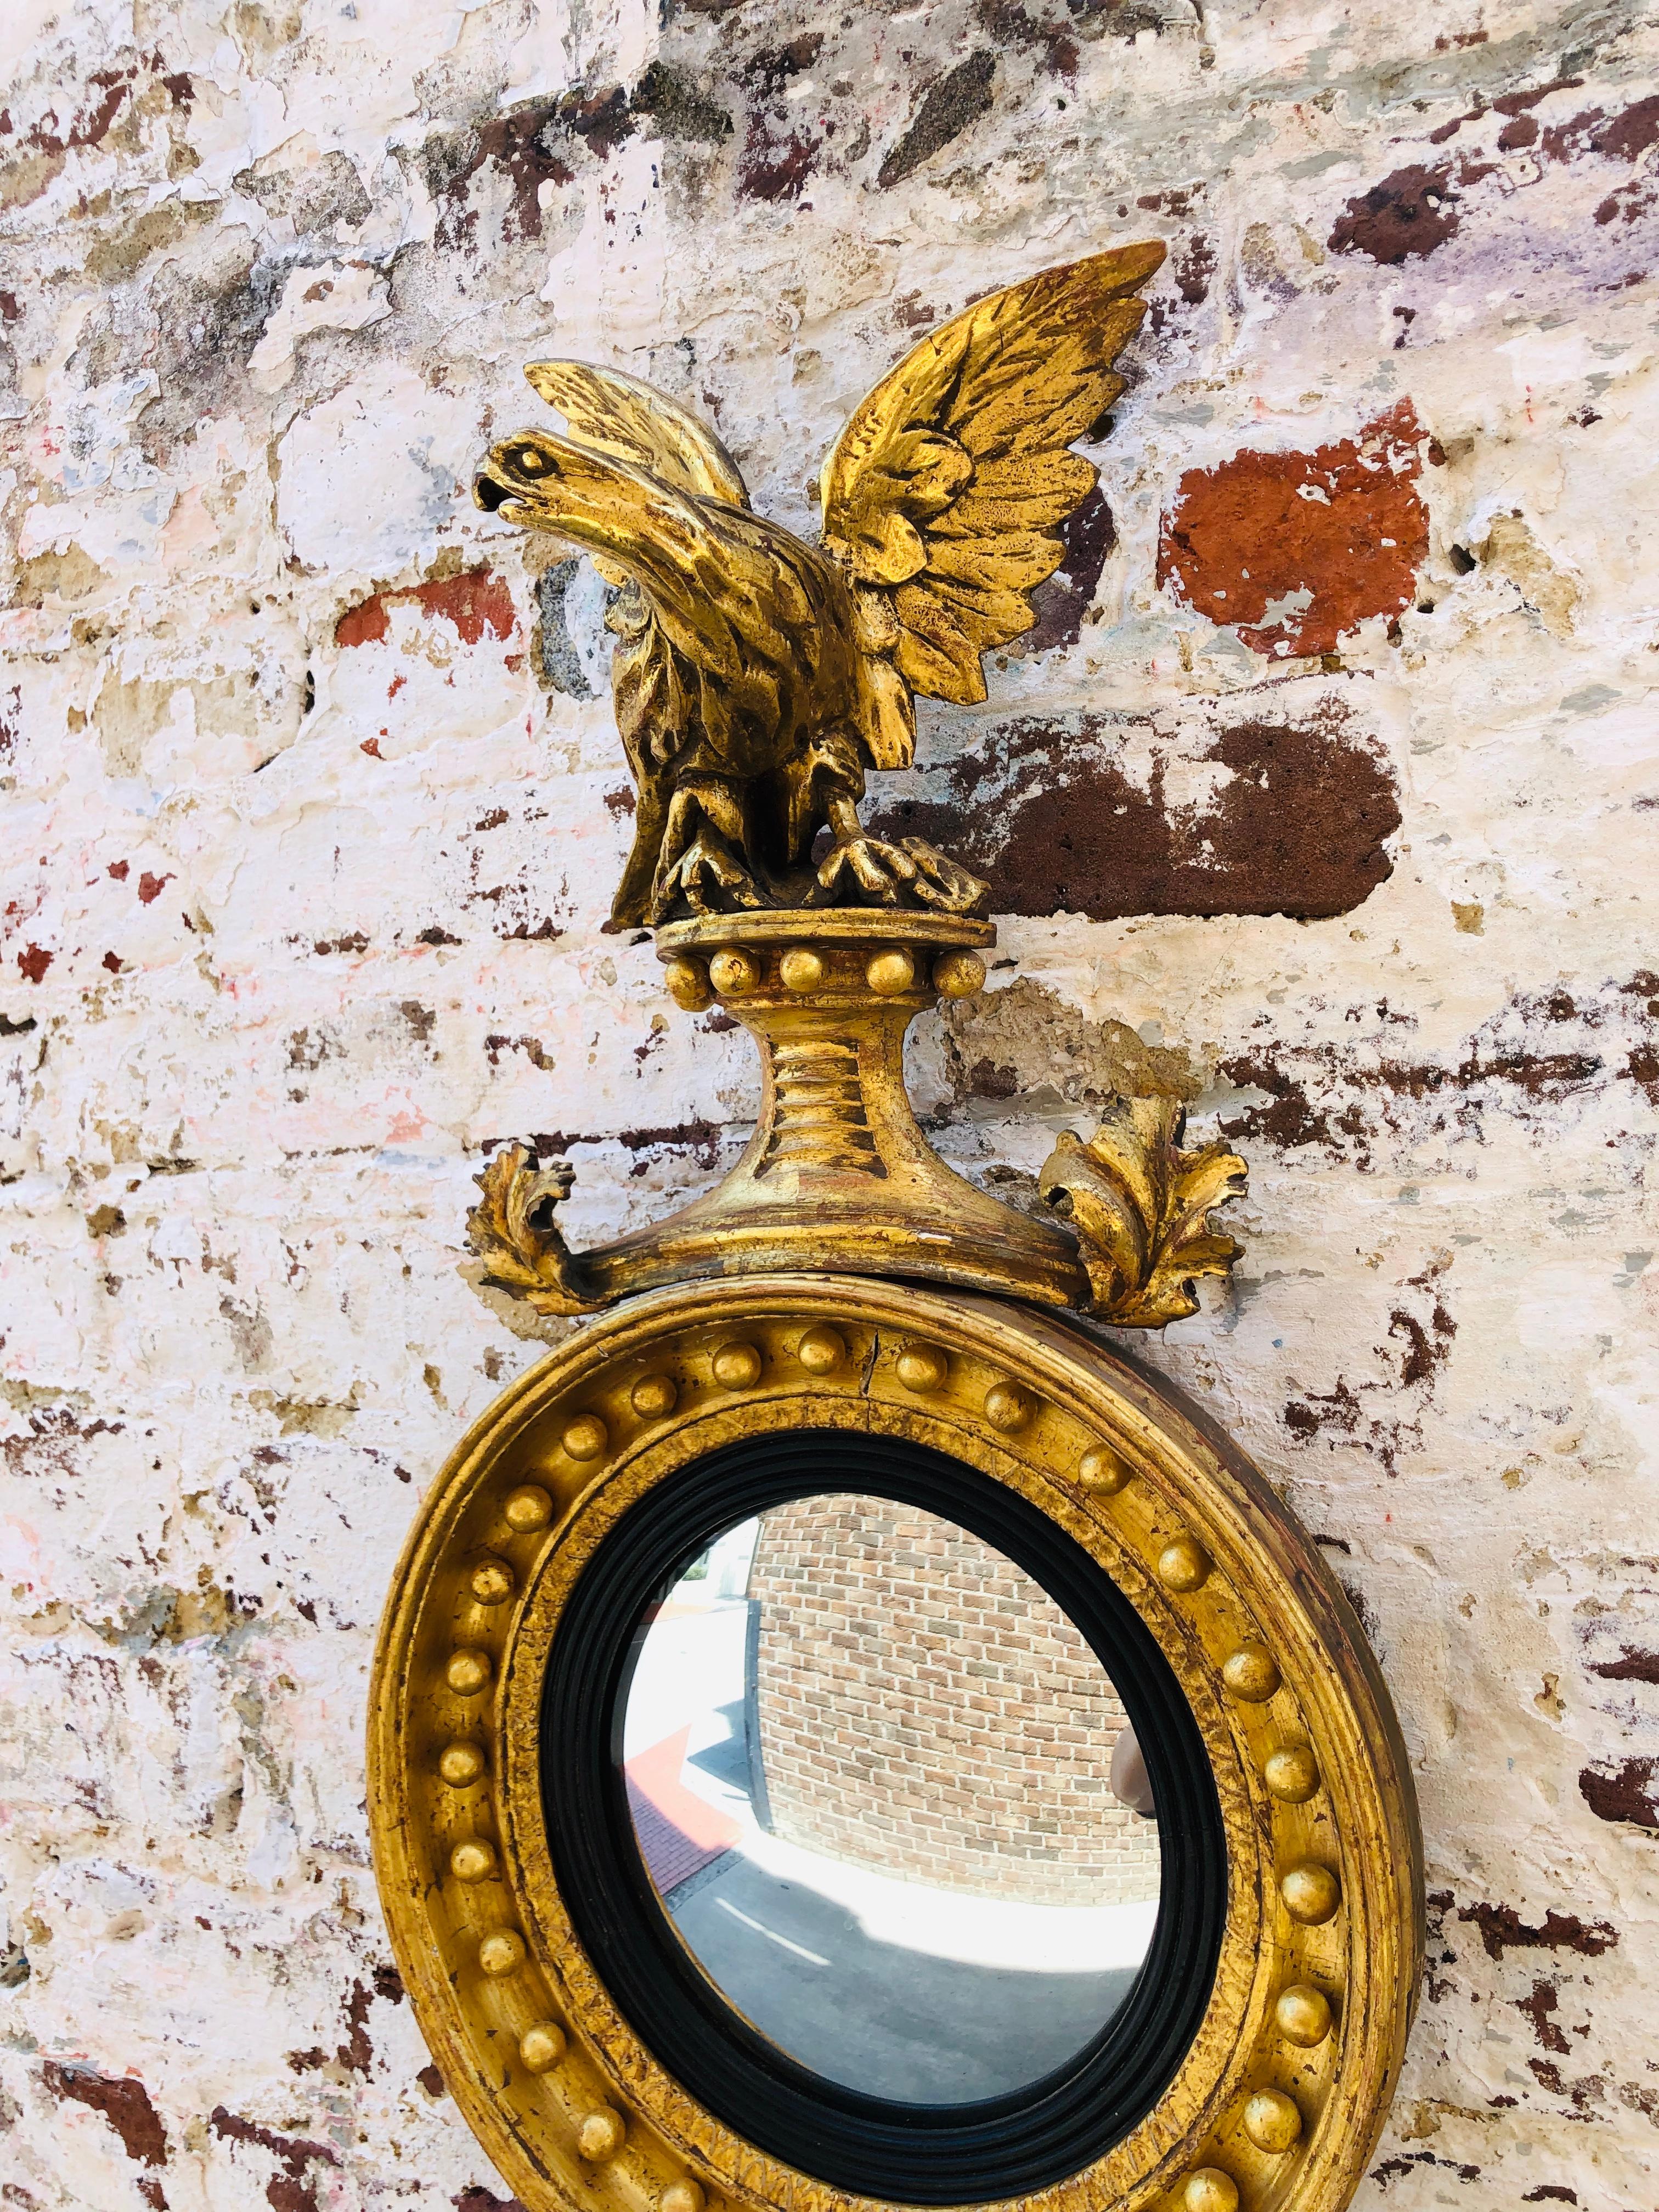 Small scale English convex mirror with London makers stamp, circa 1820.